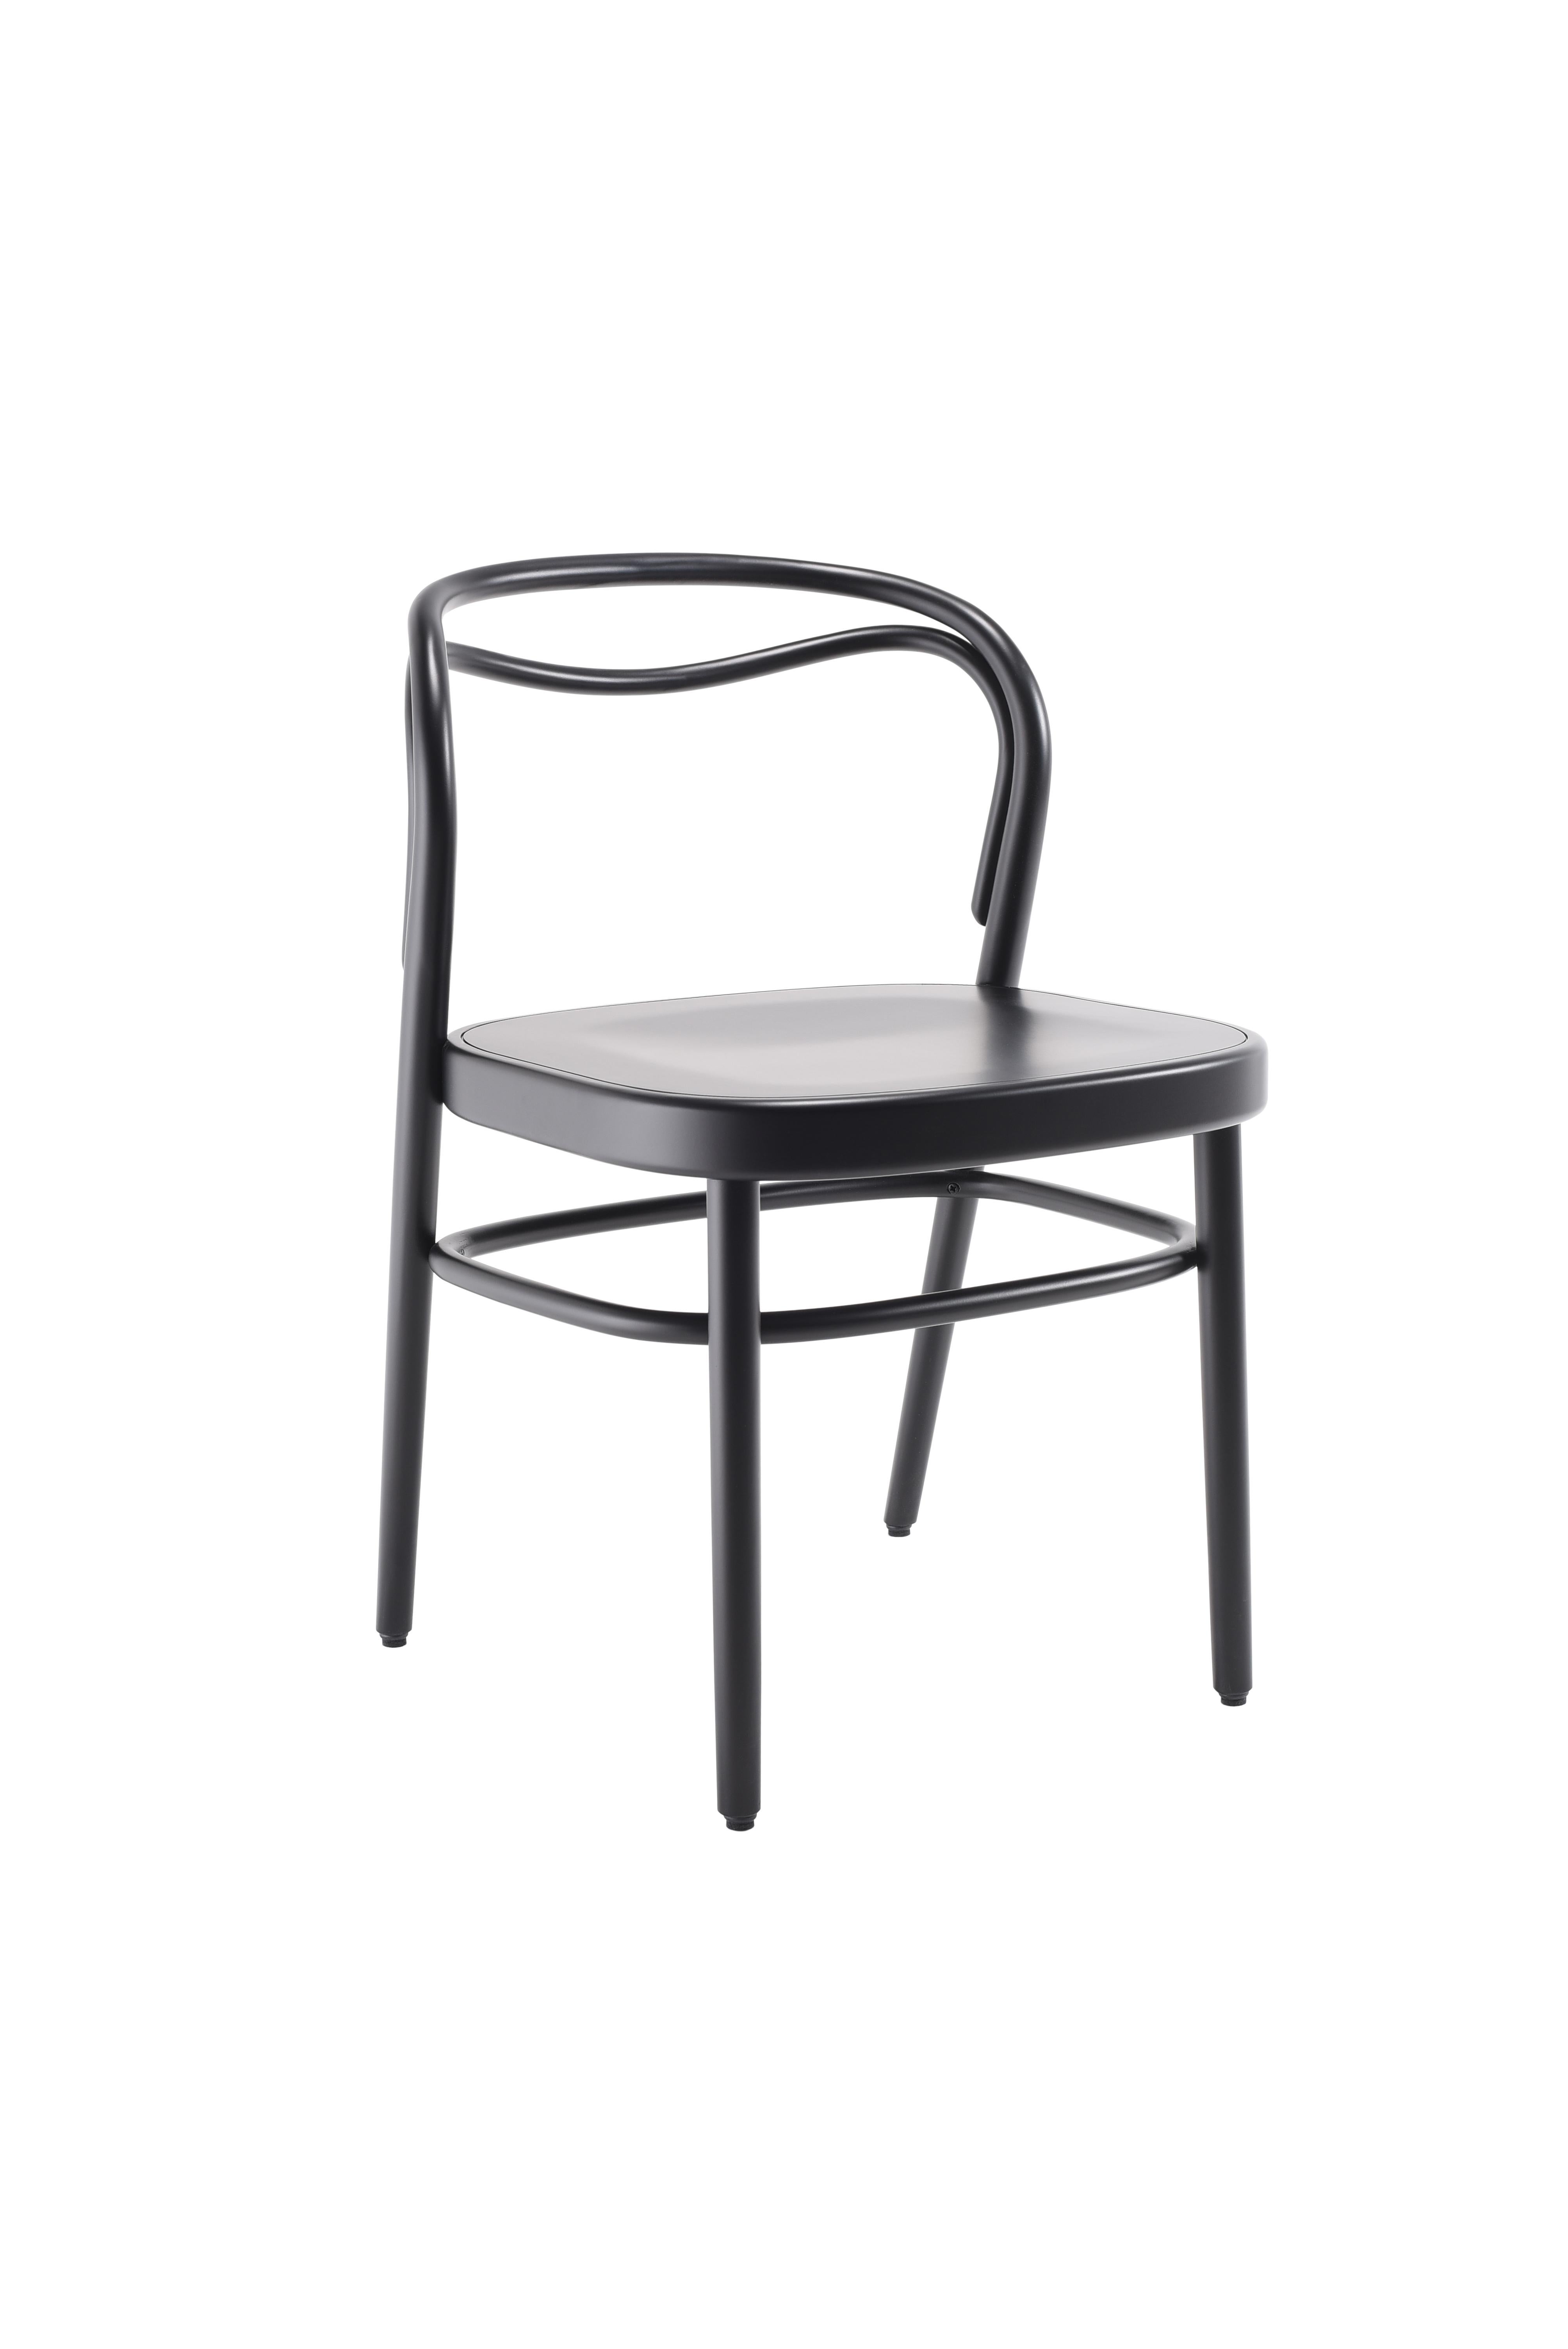 Gebrüder Thonet Vienna Beaulieu Chair with Plywood Seat by Philippe Nigro For Sale 11